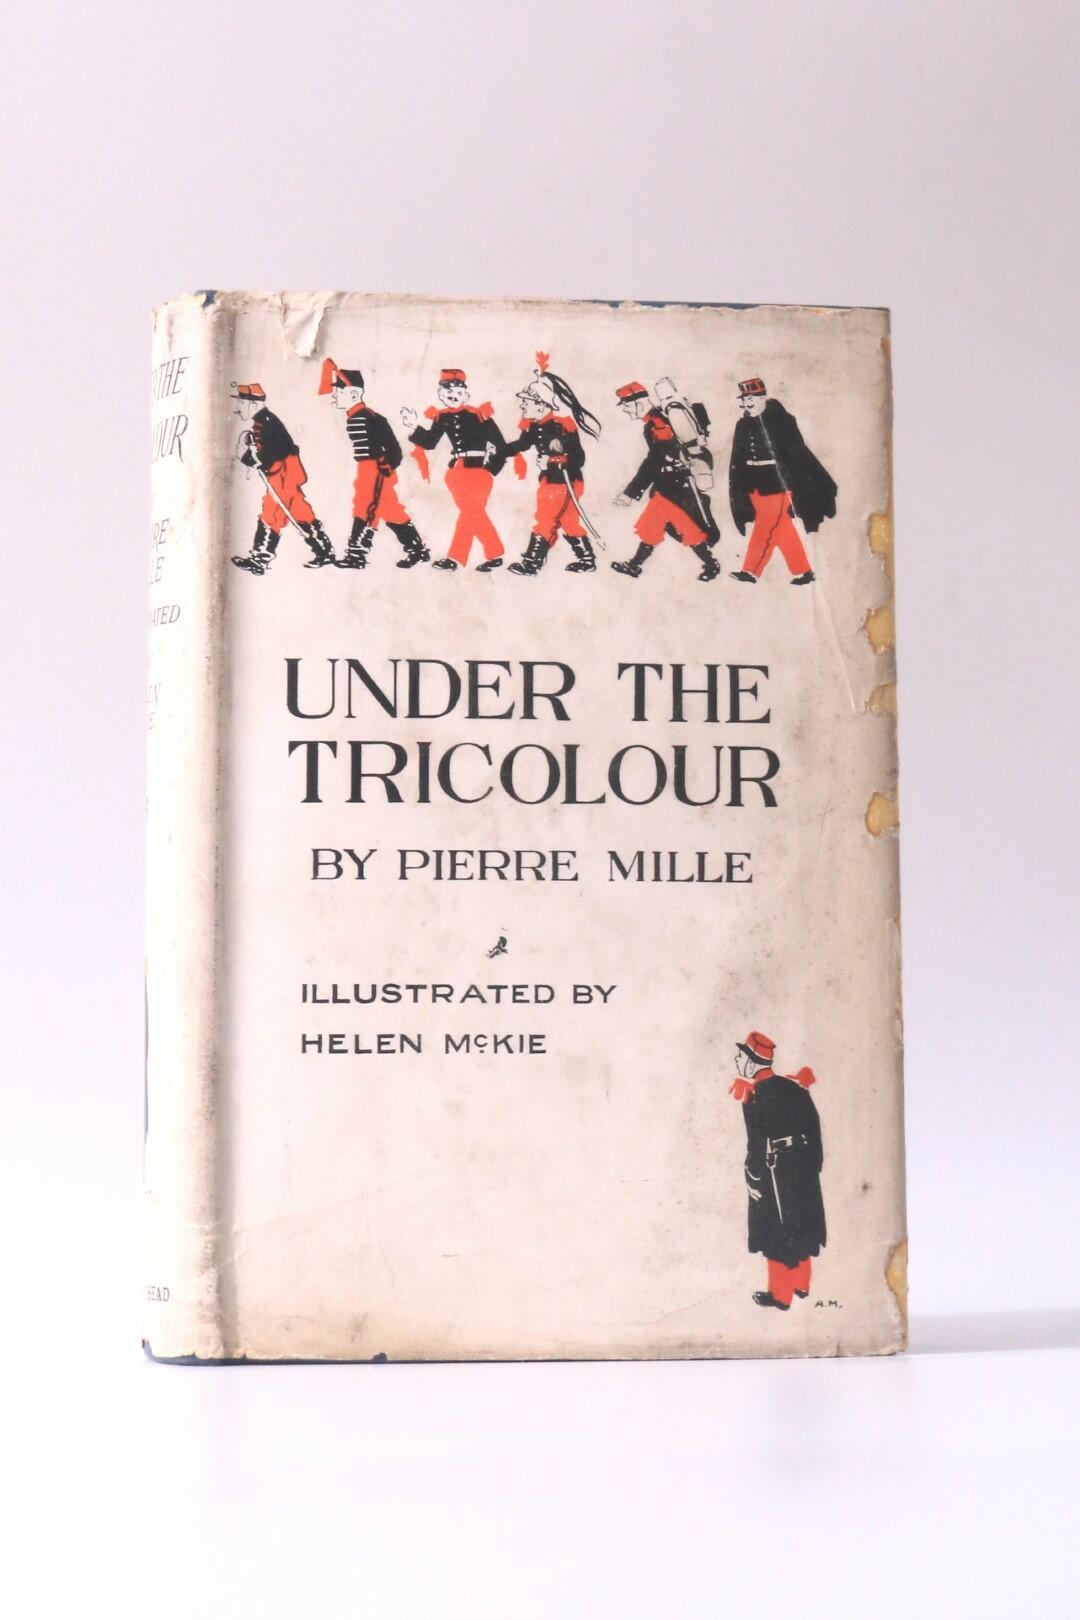 Pierre Mille - Under the Tricolour - Bodley Head, 1915, First Edition.